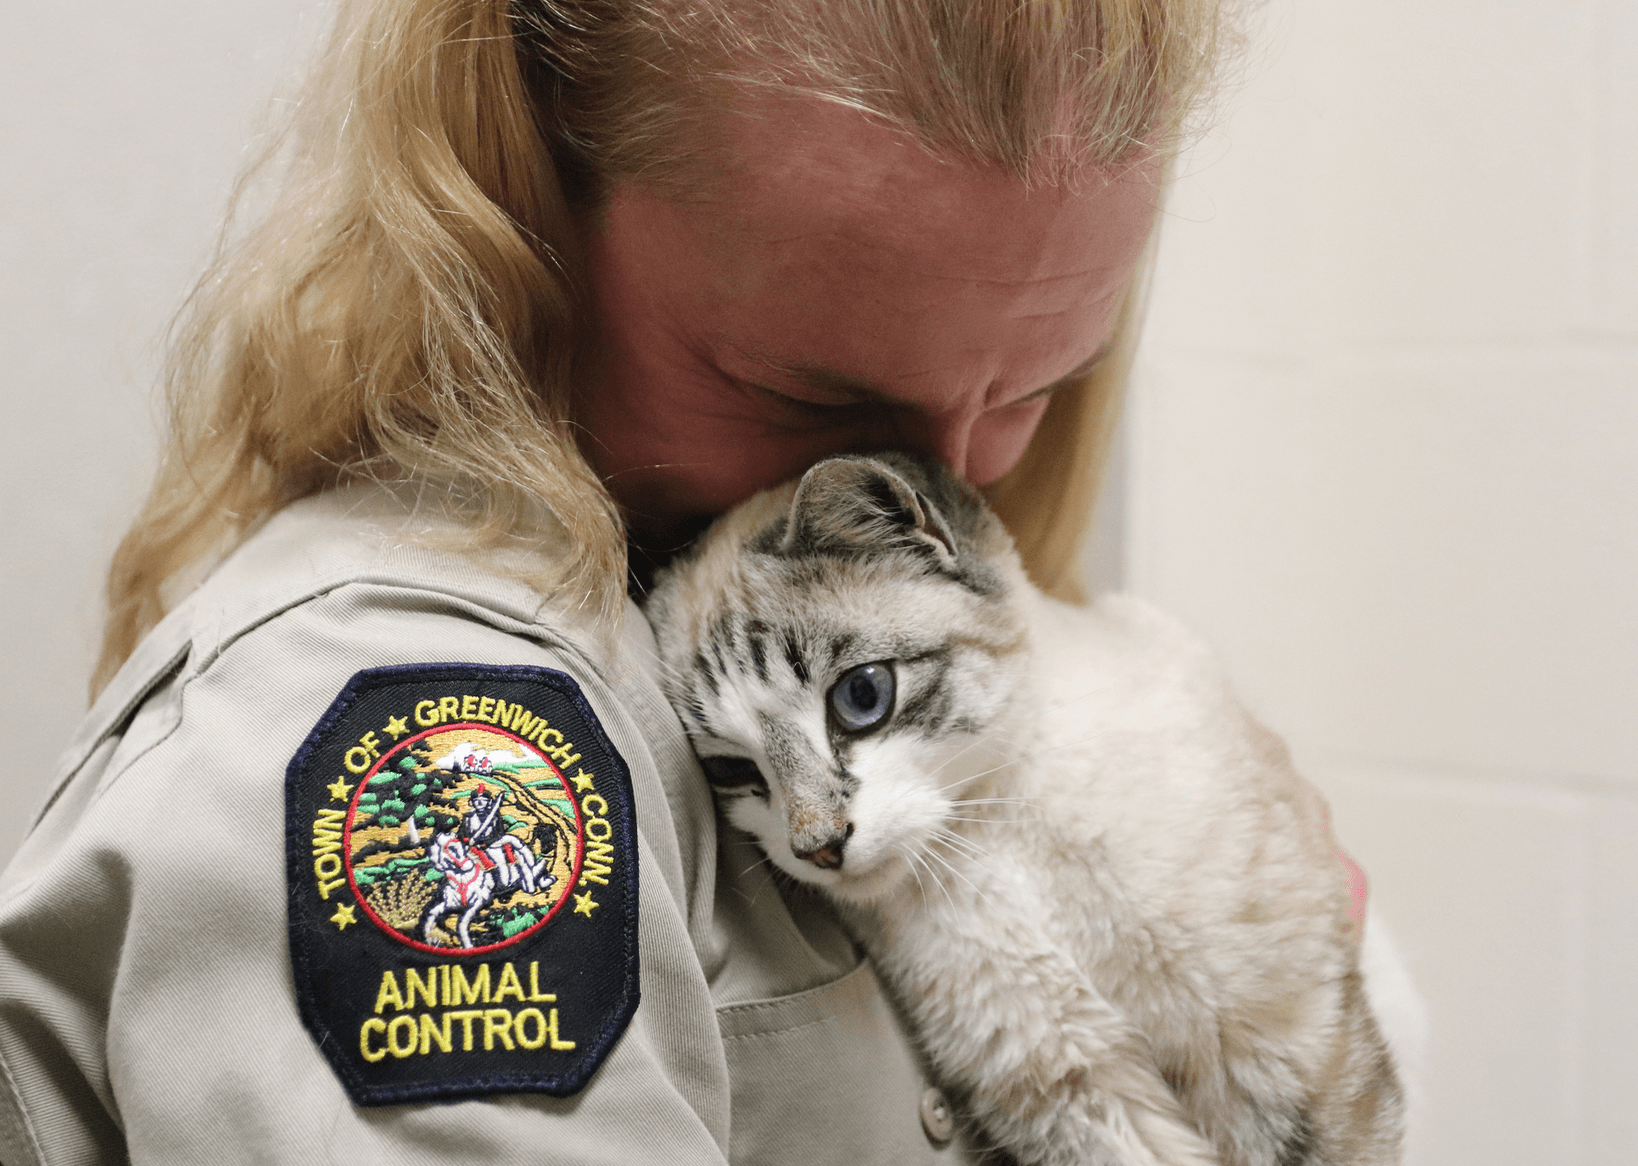 Simon, who is recovering from surgery to his tibia, hips and leg, is super affectionate and a fighter. Pictures with ACO Stacy Rameor at Animal Control's North Street facility. Jan 2, 2020 Photo: Leslie Yager